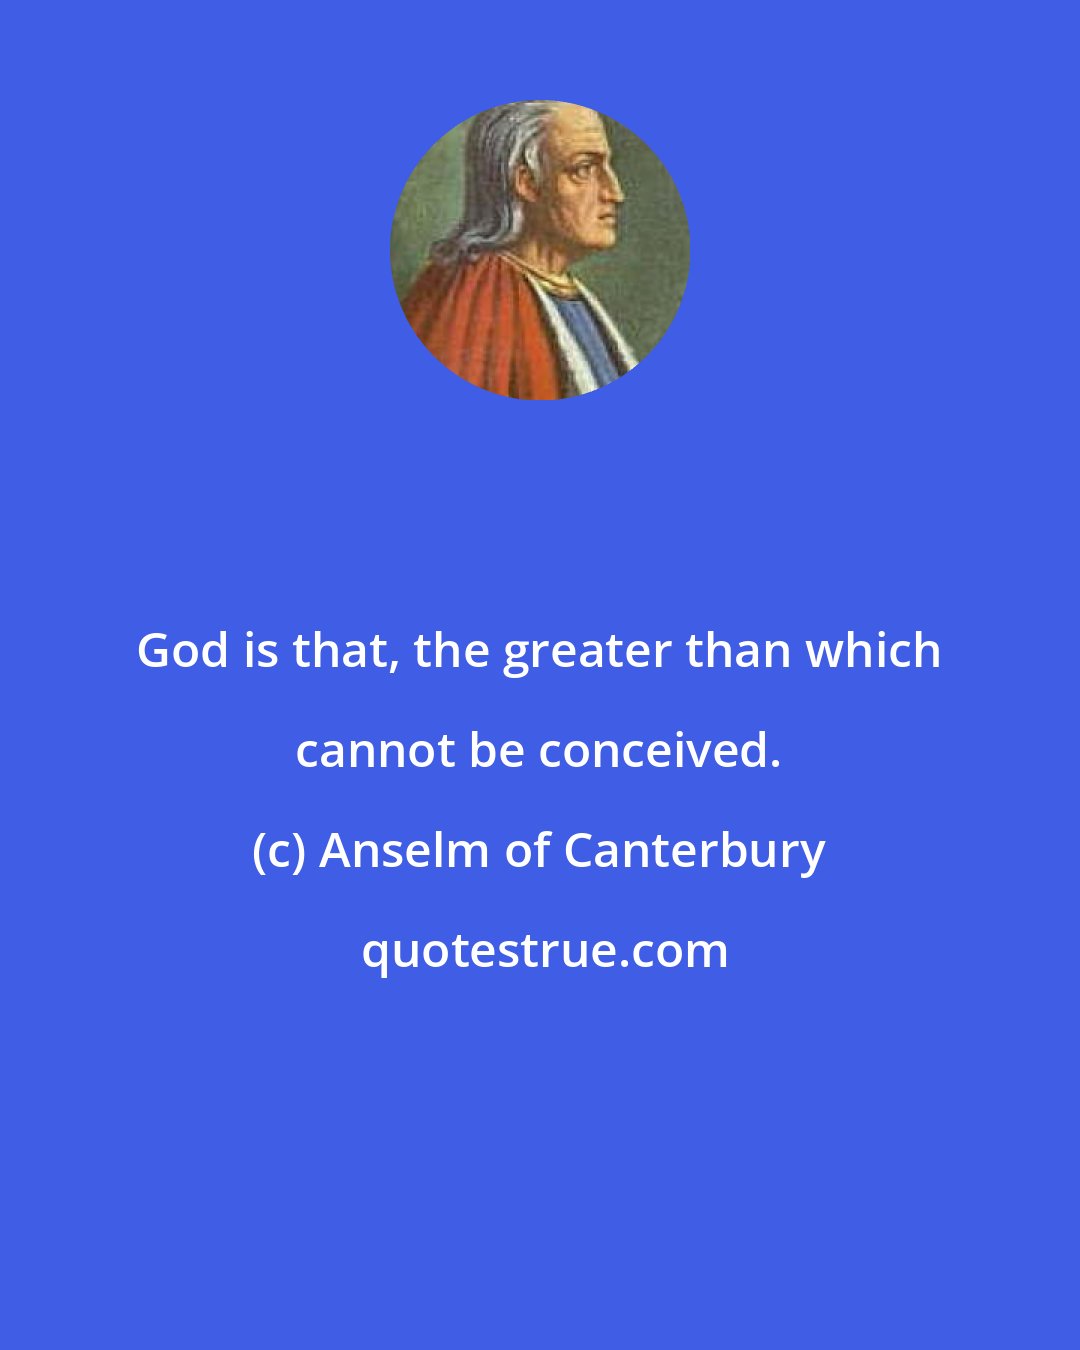 Anselm of Canterbury: God is that, the greater than which cannot be conceived.